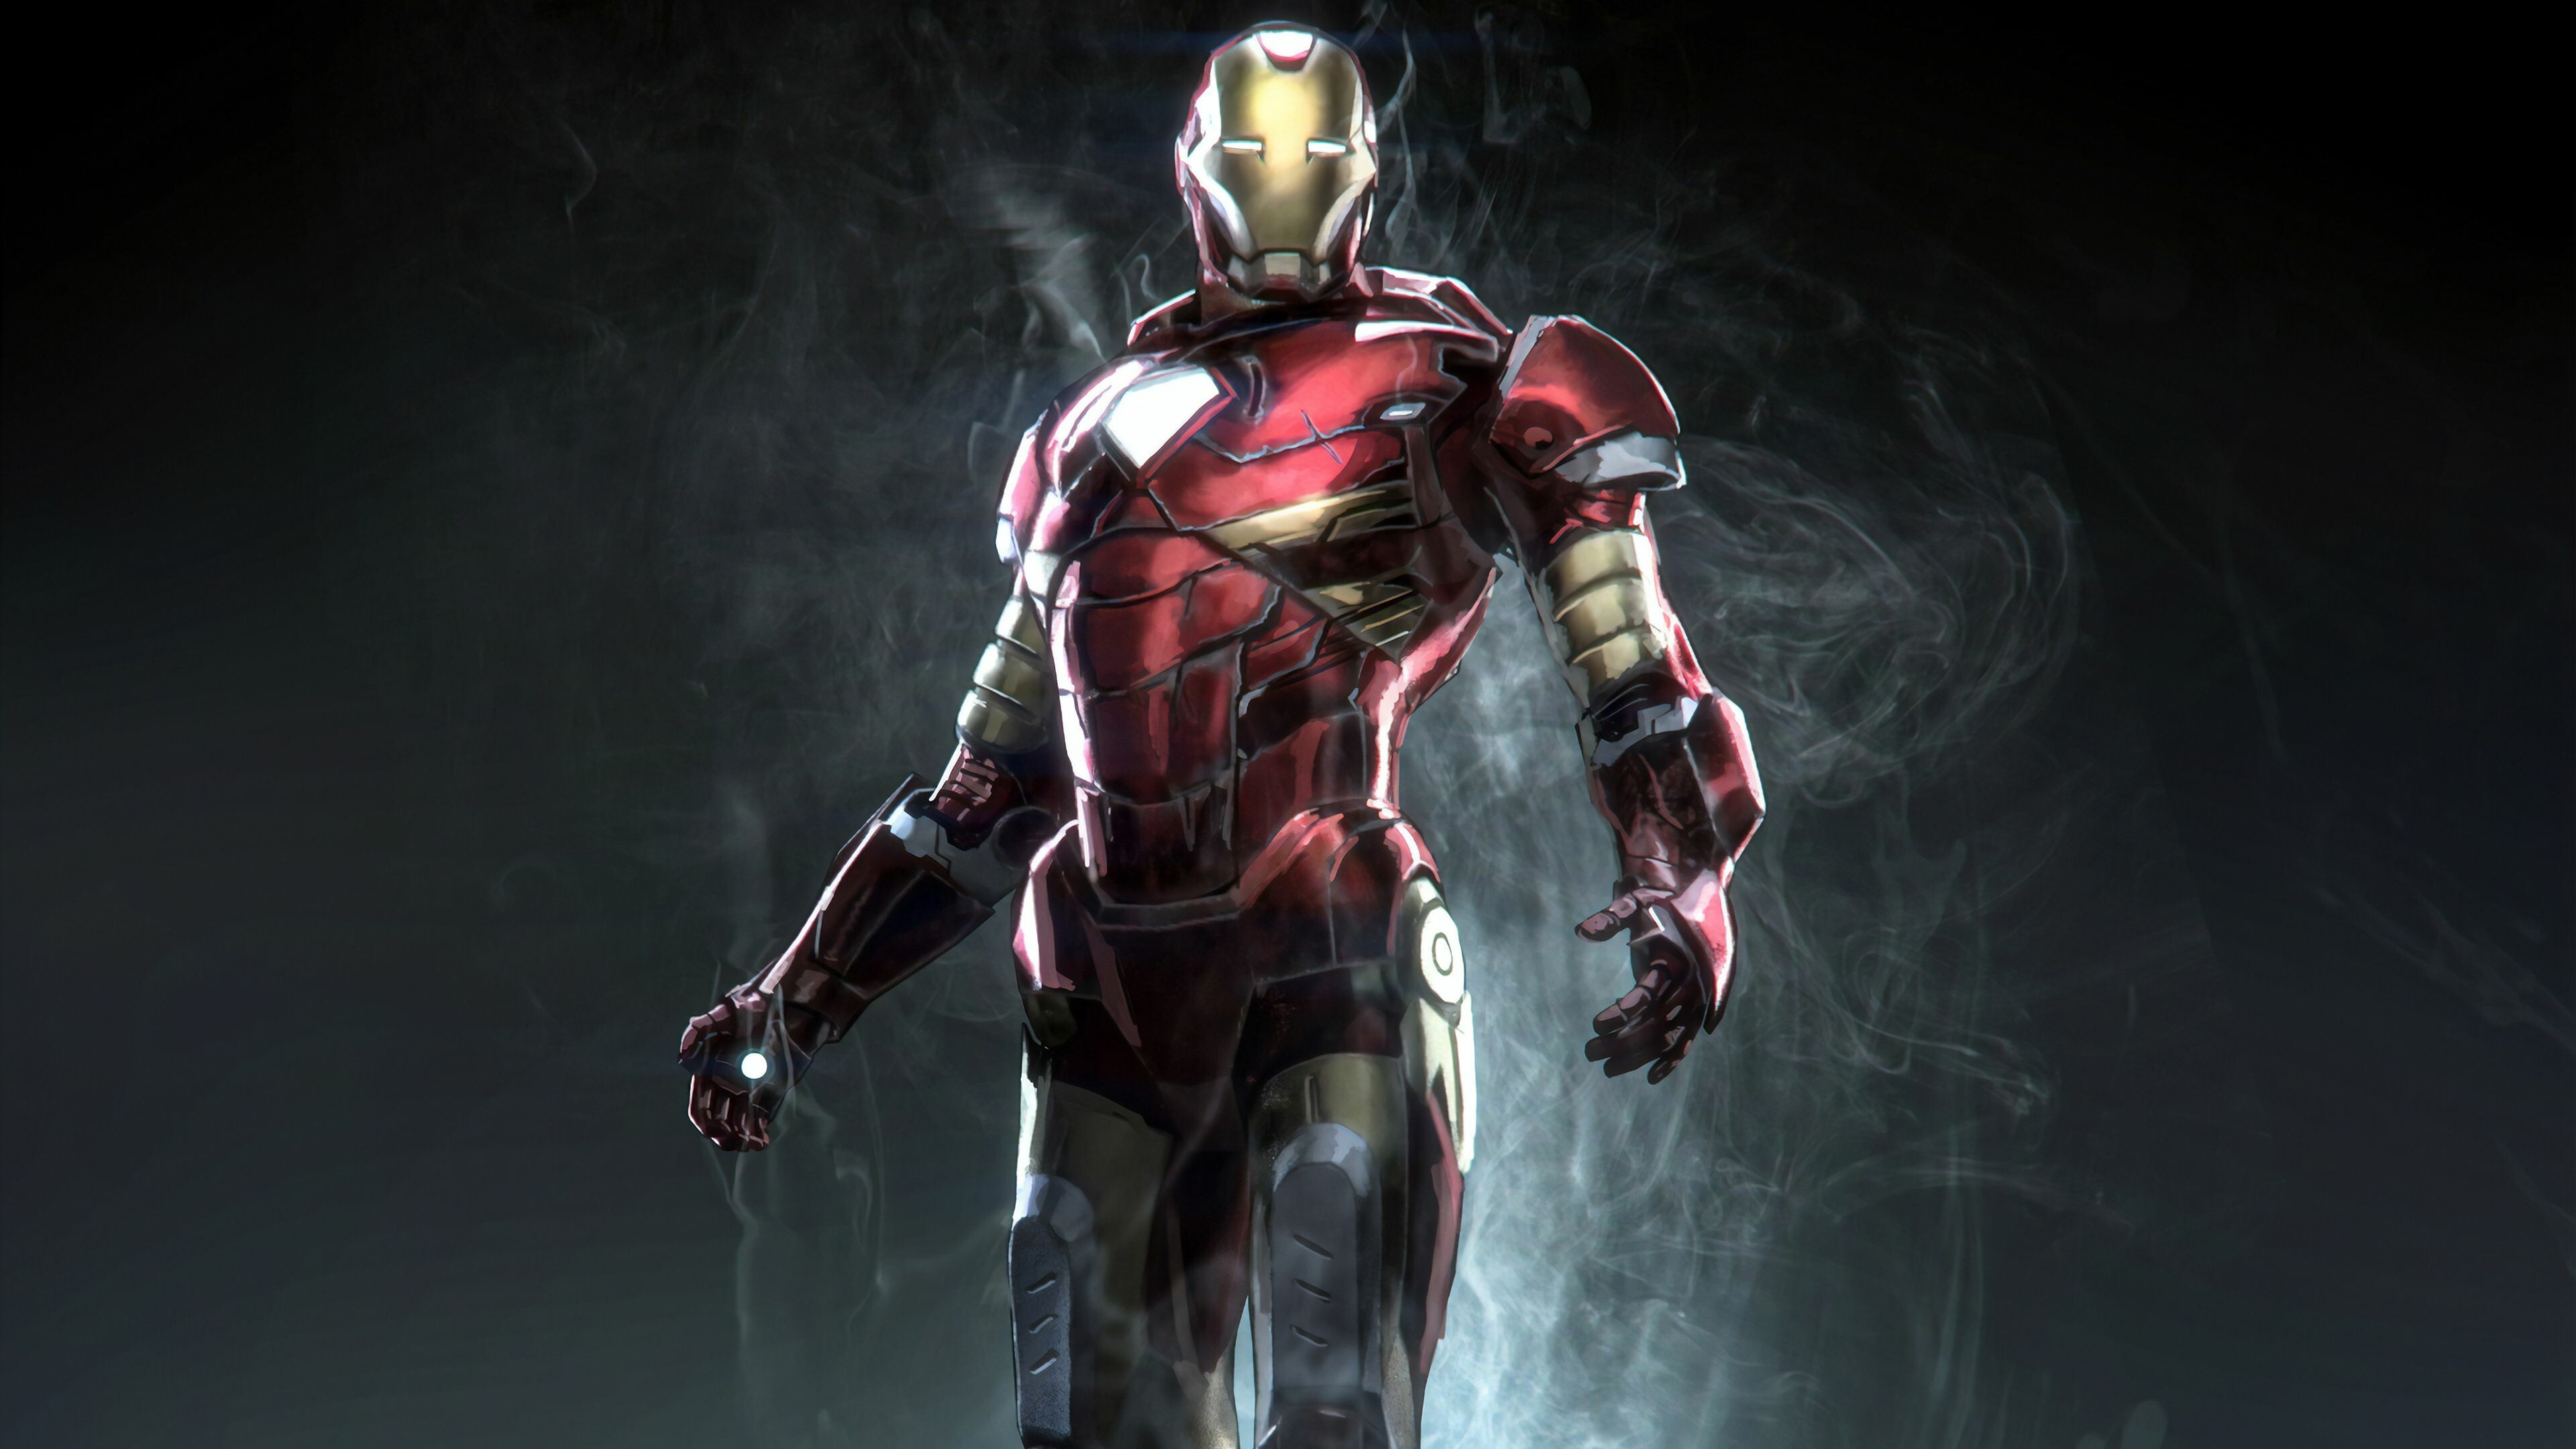 Marvel Heroes: Iron Man, A superhero appearing in American comic books. 3840x2160 4K Background.